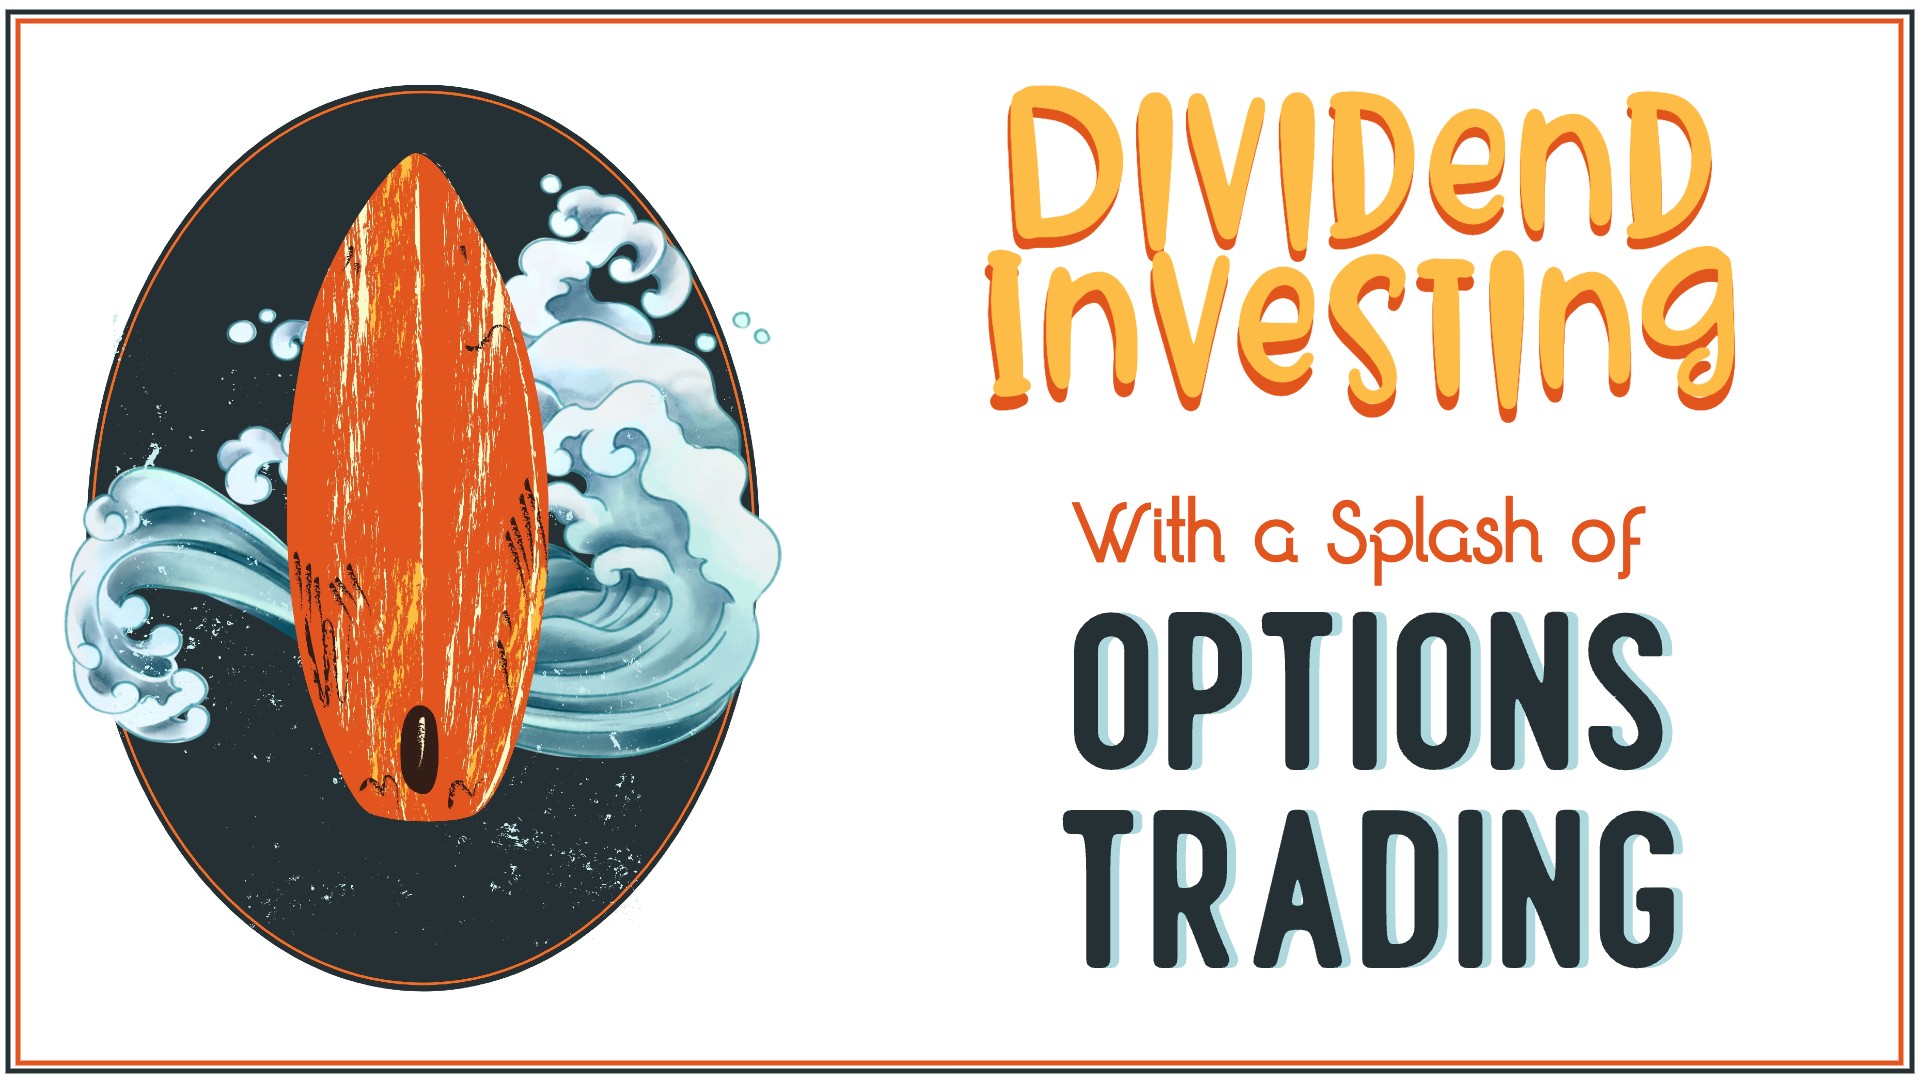 Dividend Investing with a Splash of Options Trading